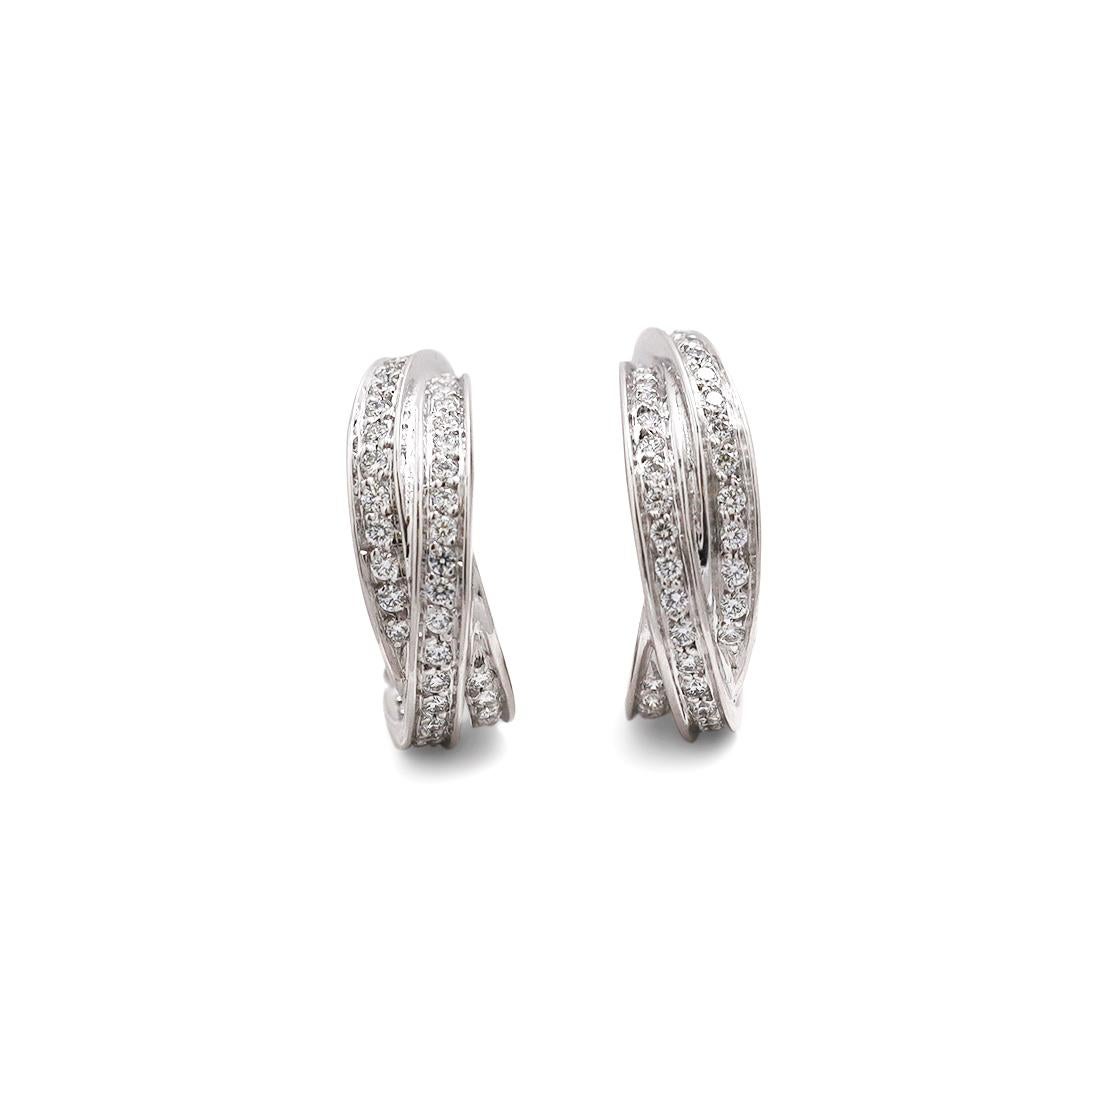 Authentic Cartier Trinity earrings crafted in 18 karat white gold. Comprised of a trio of interlocking bands set with round brilliant cut diamonds weighing approximately 1 carat for the pair. The earrings measure .96 inches in length and .26 inches